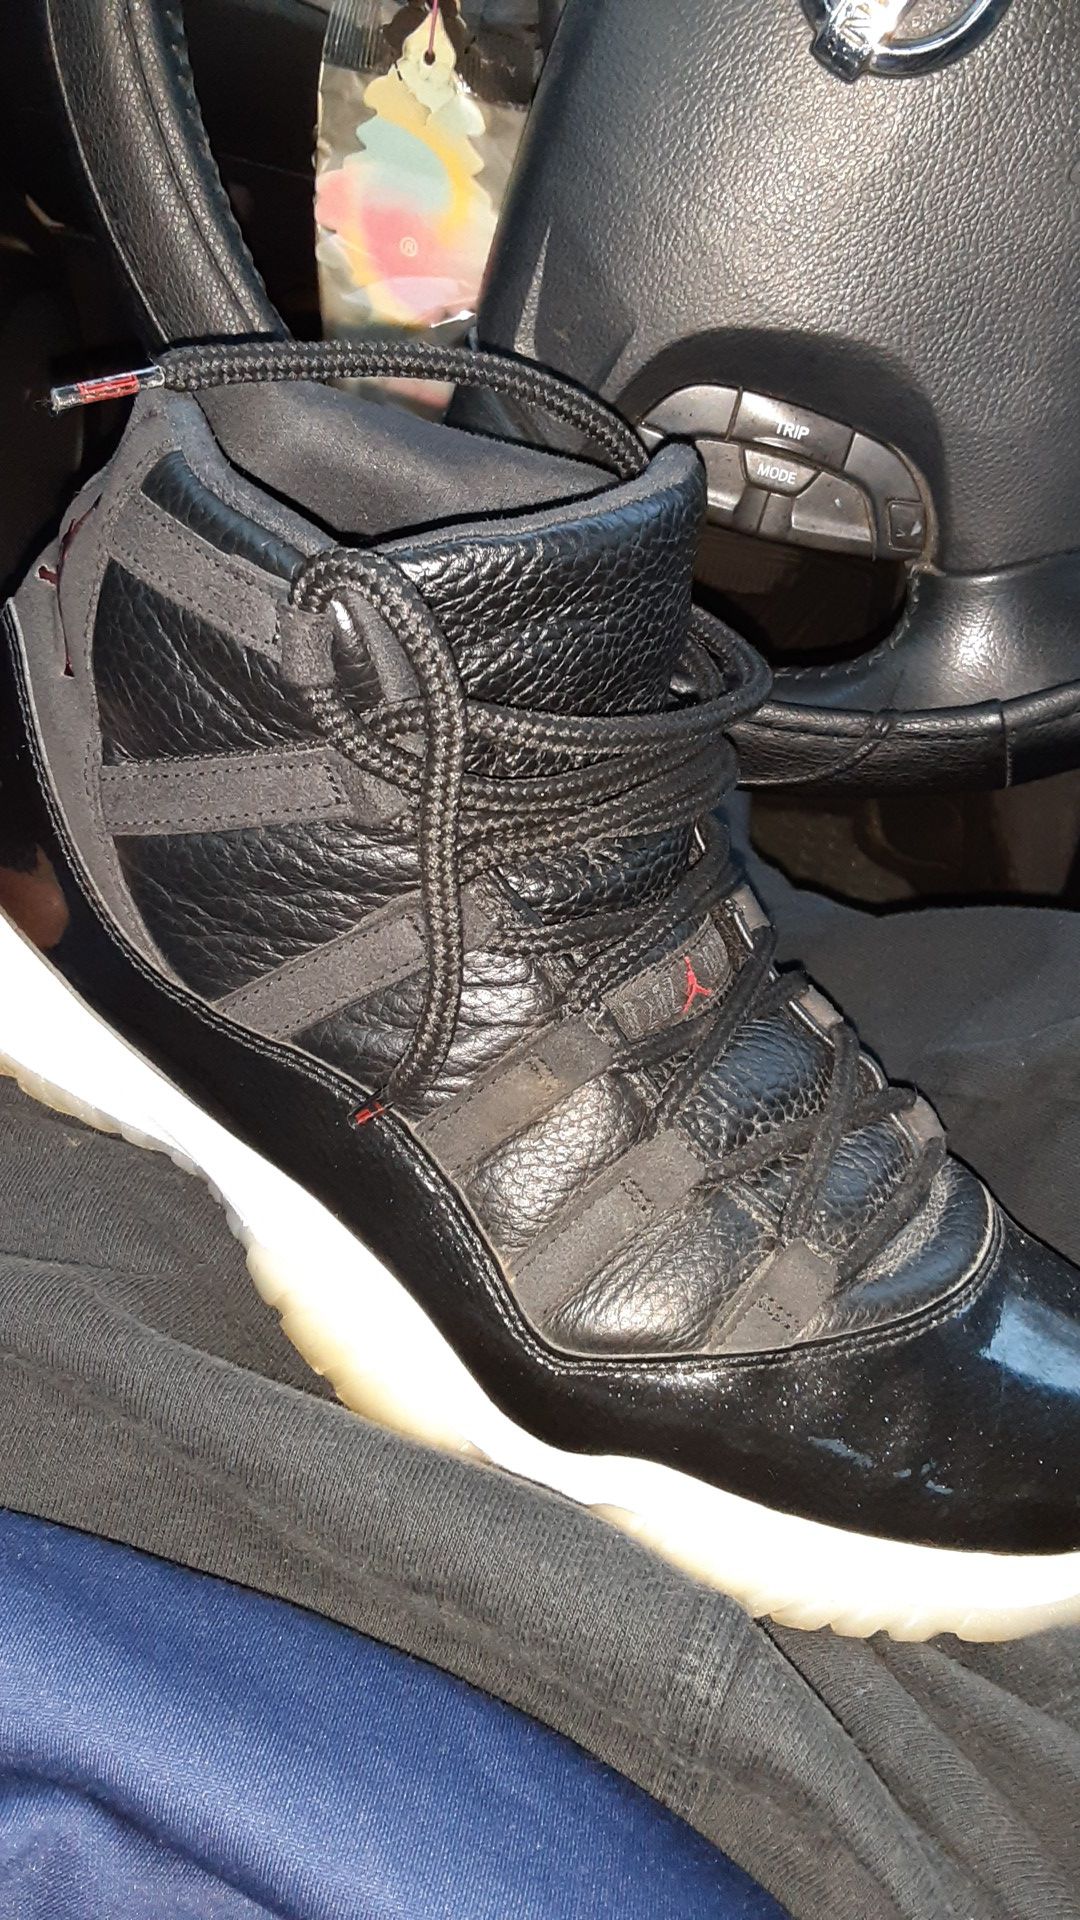 Jordans Retro Size 11 used but in Excellent condition 9/10